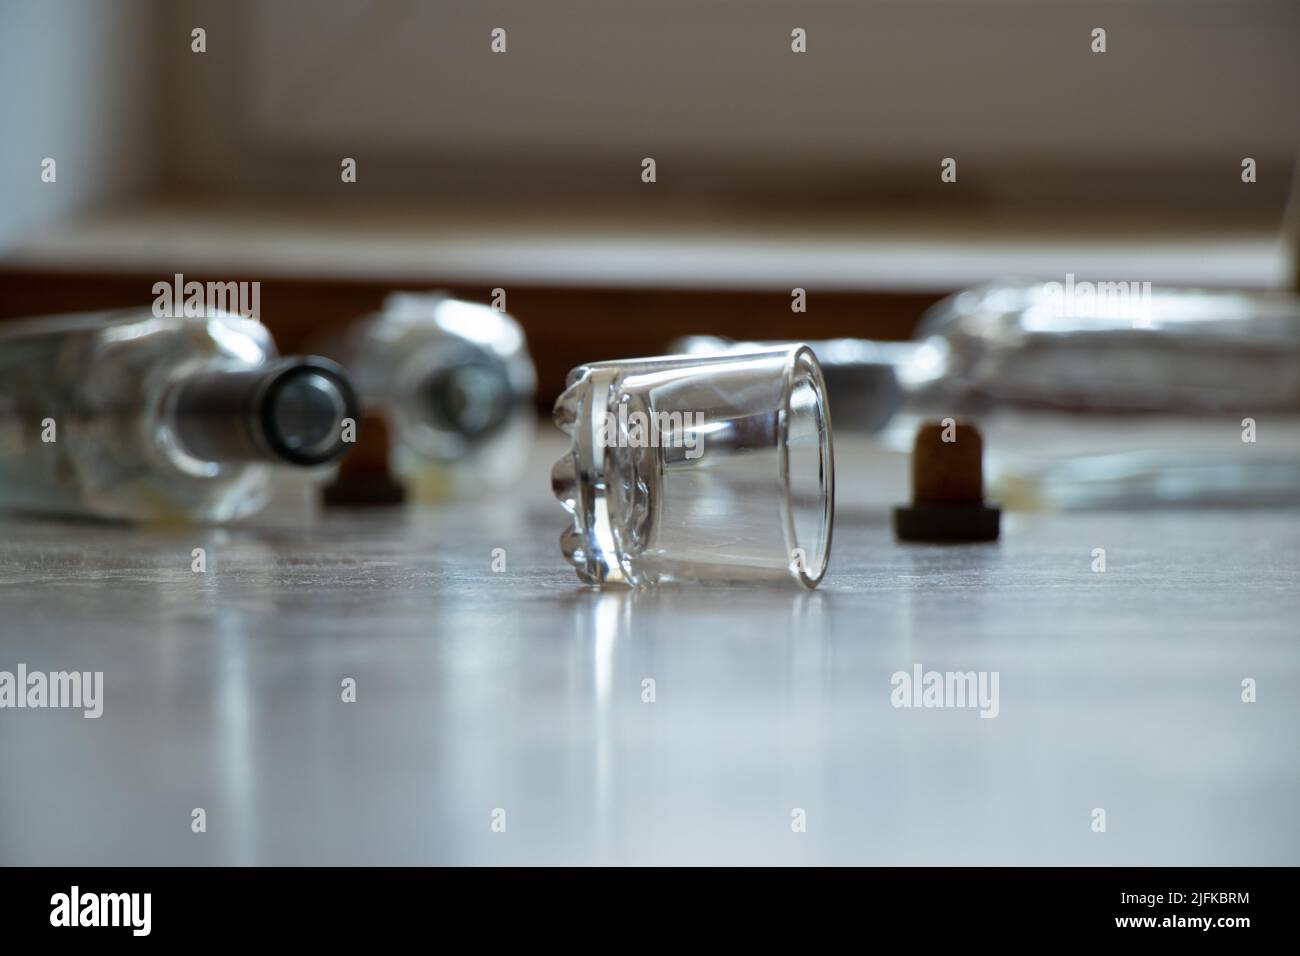 A glass and empty alcohol bottles lie on the floor in an apartment in the dark, alcoholism and bad habits, glass bottles and a glass of vodka Stock Photo